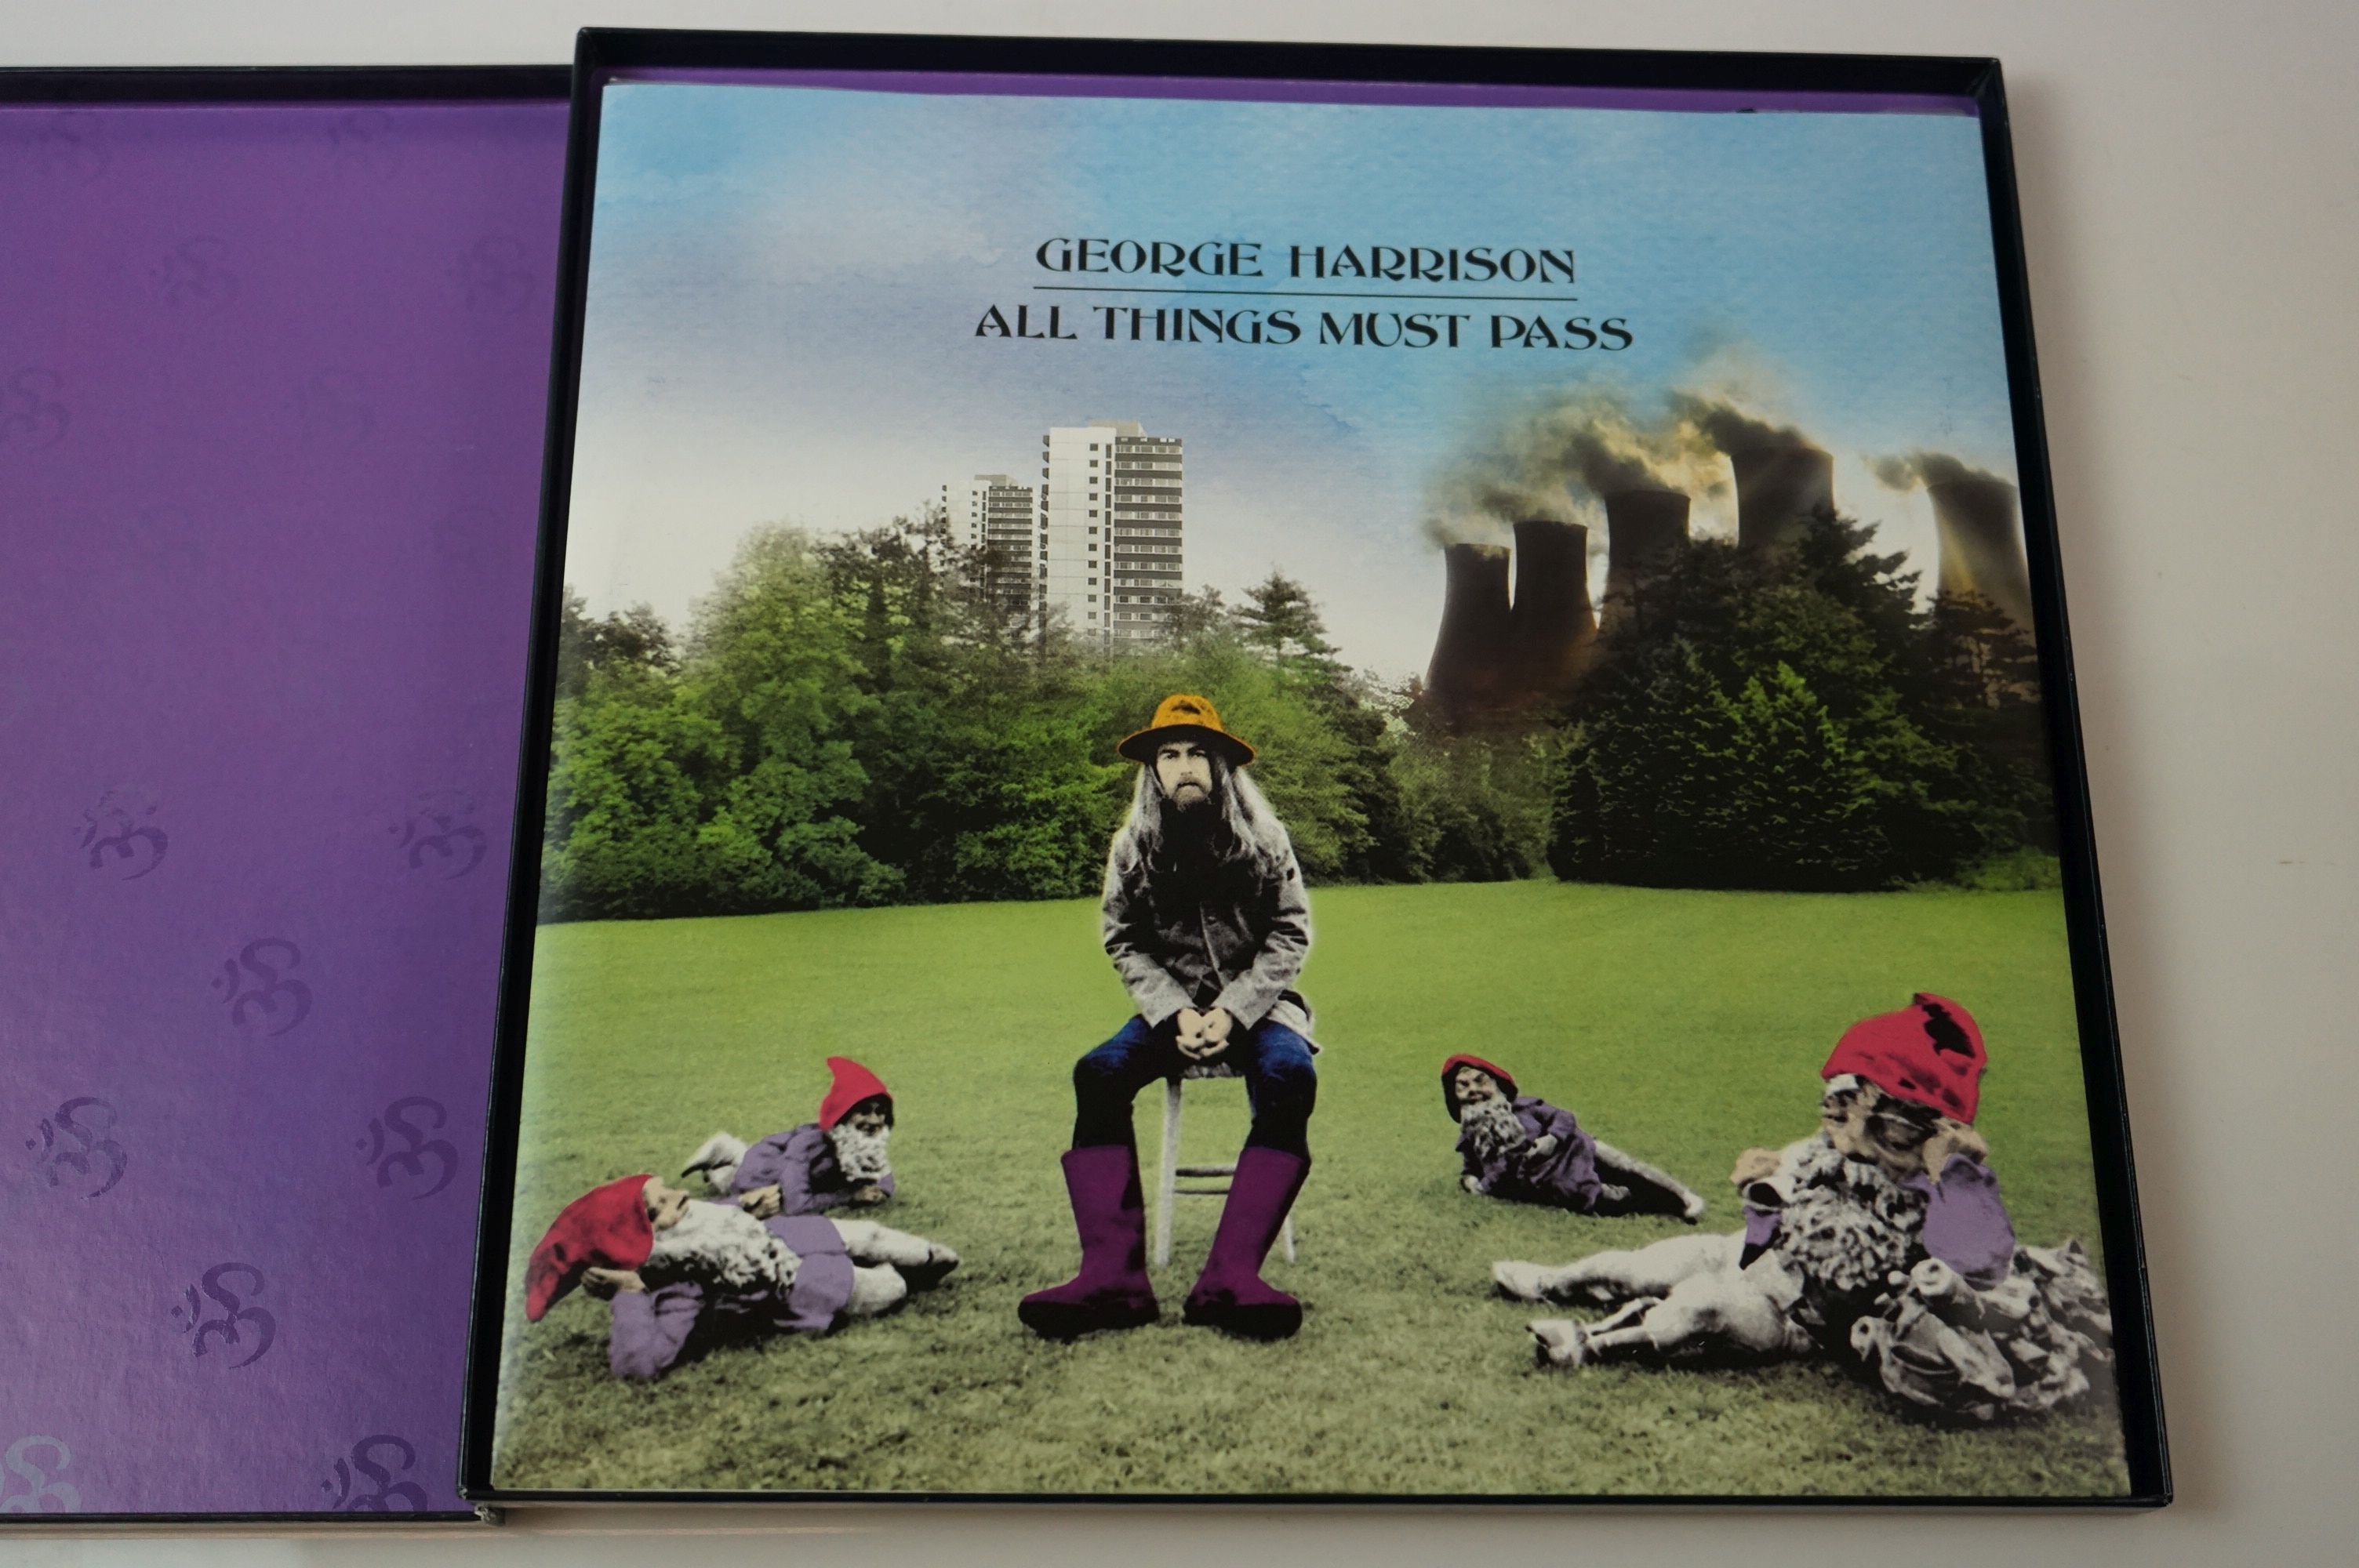 Vinyl - George Harrison All Things Must Pass (GnOM Records 7243 5 3047412) 3 LP box set (2001 - Image 2 of 7